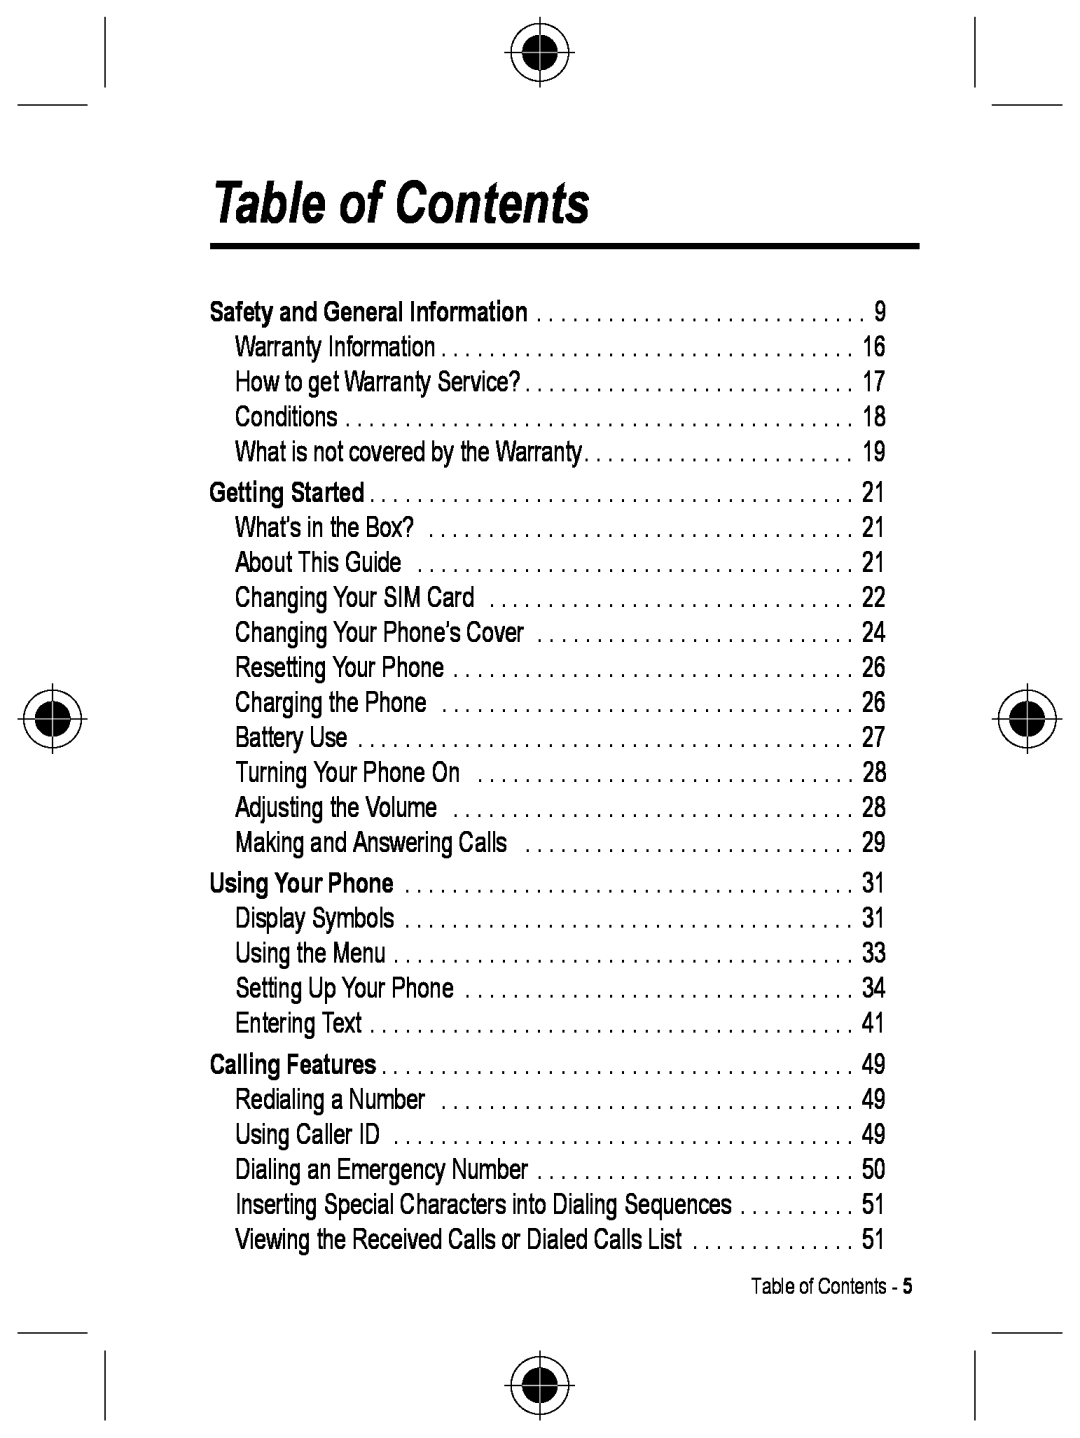 Motorola C330 Table of Contents, About This Guide, Changing Your Phone’s Cover, Charging the Phone, Turning Your Phone On 